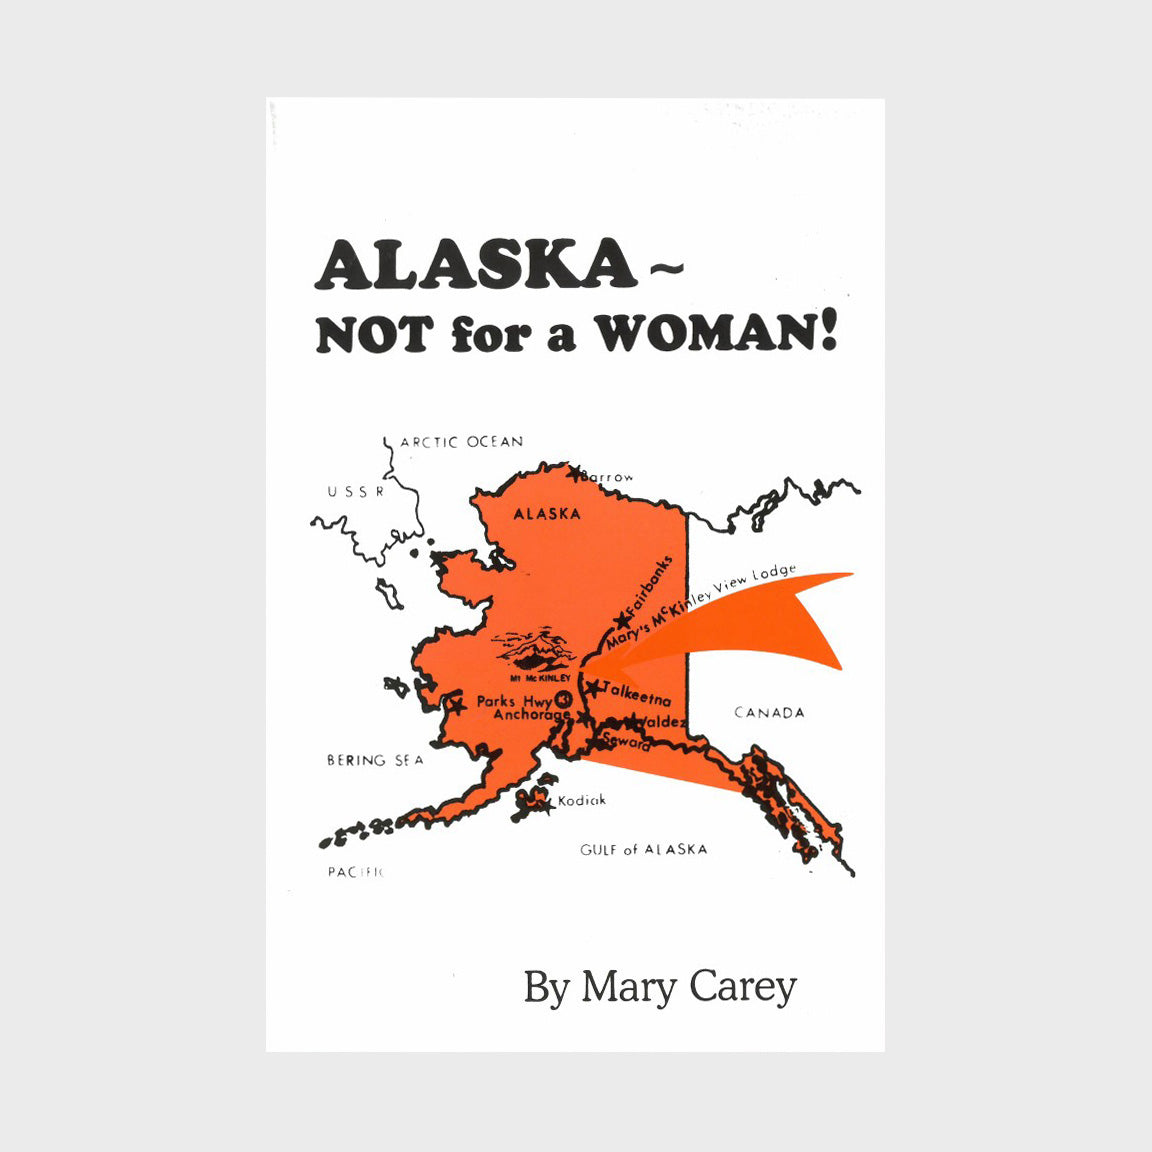 Alaska: Not for a Woman! by Mary Carey